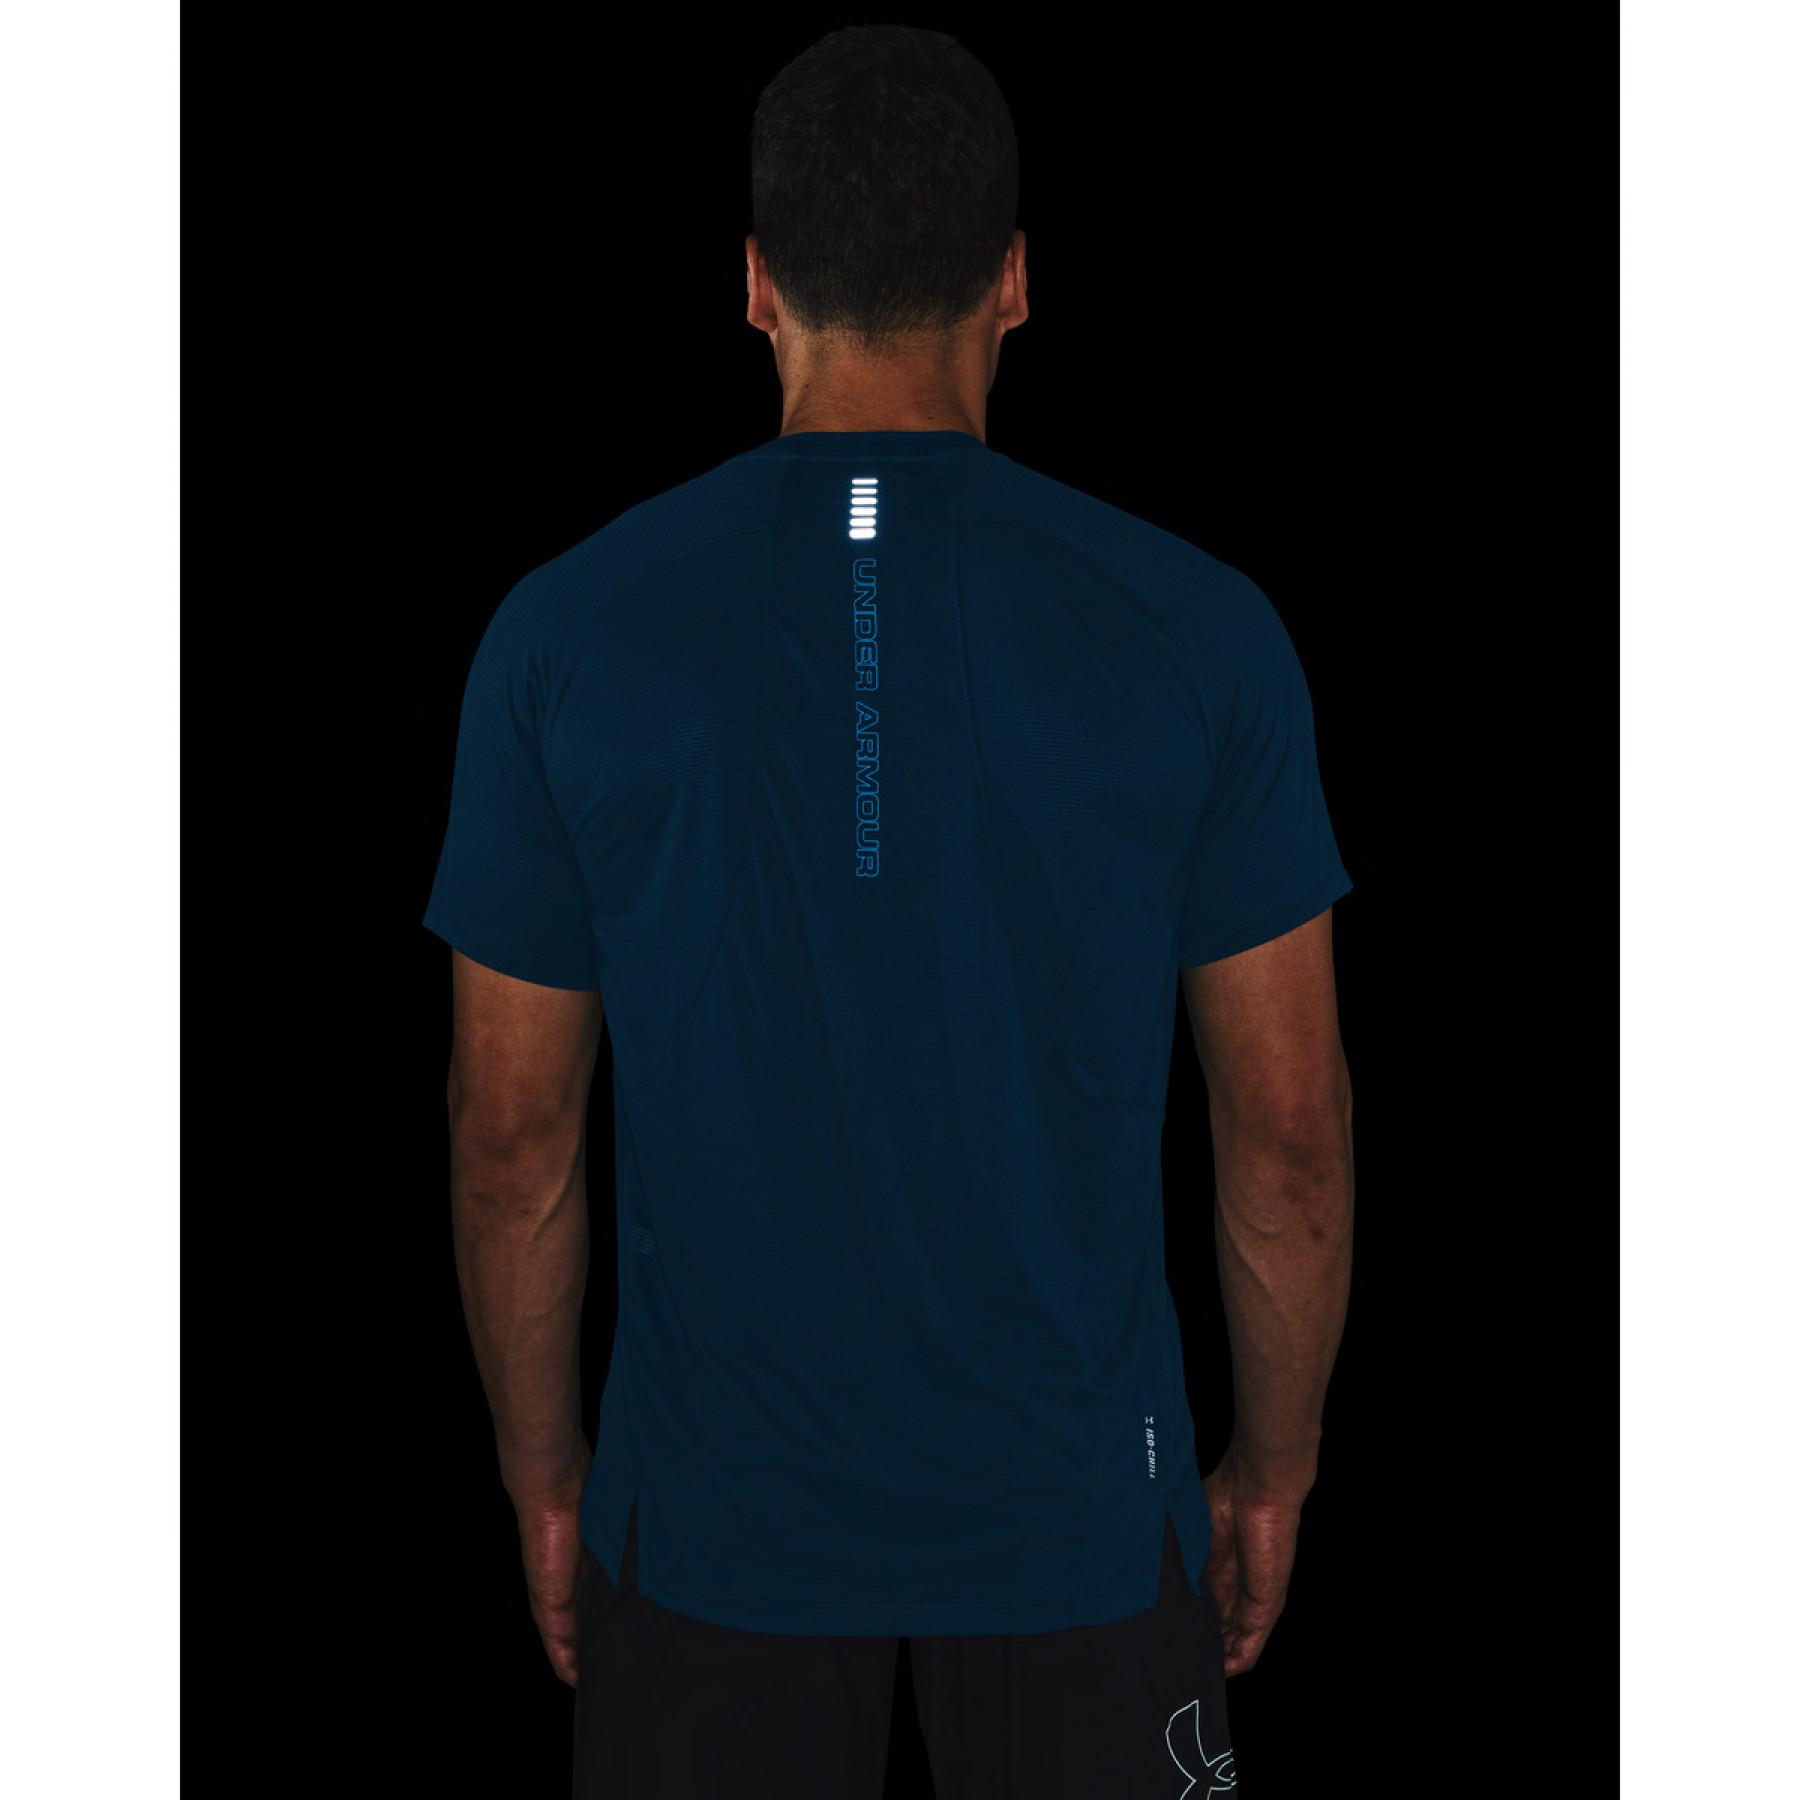 Jersey Under Armour à manches courtes Qualifier iso-chill Run